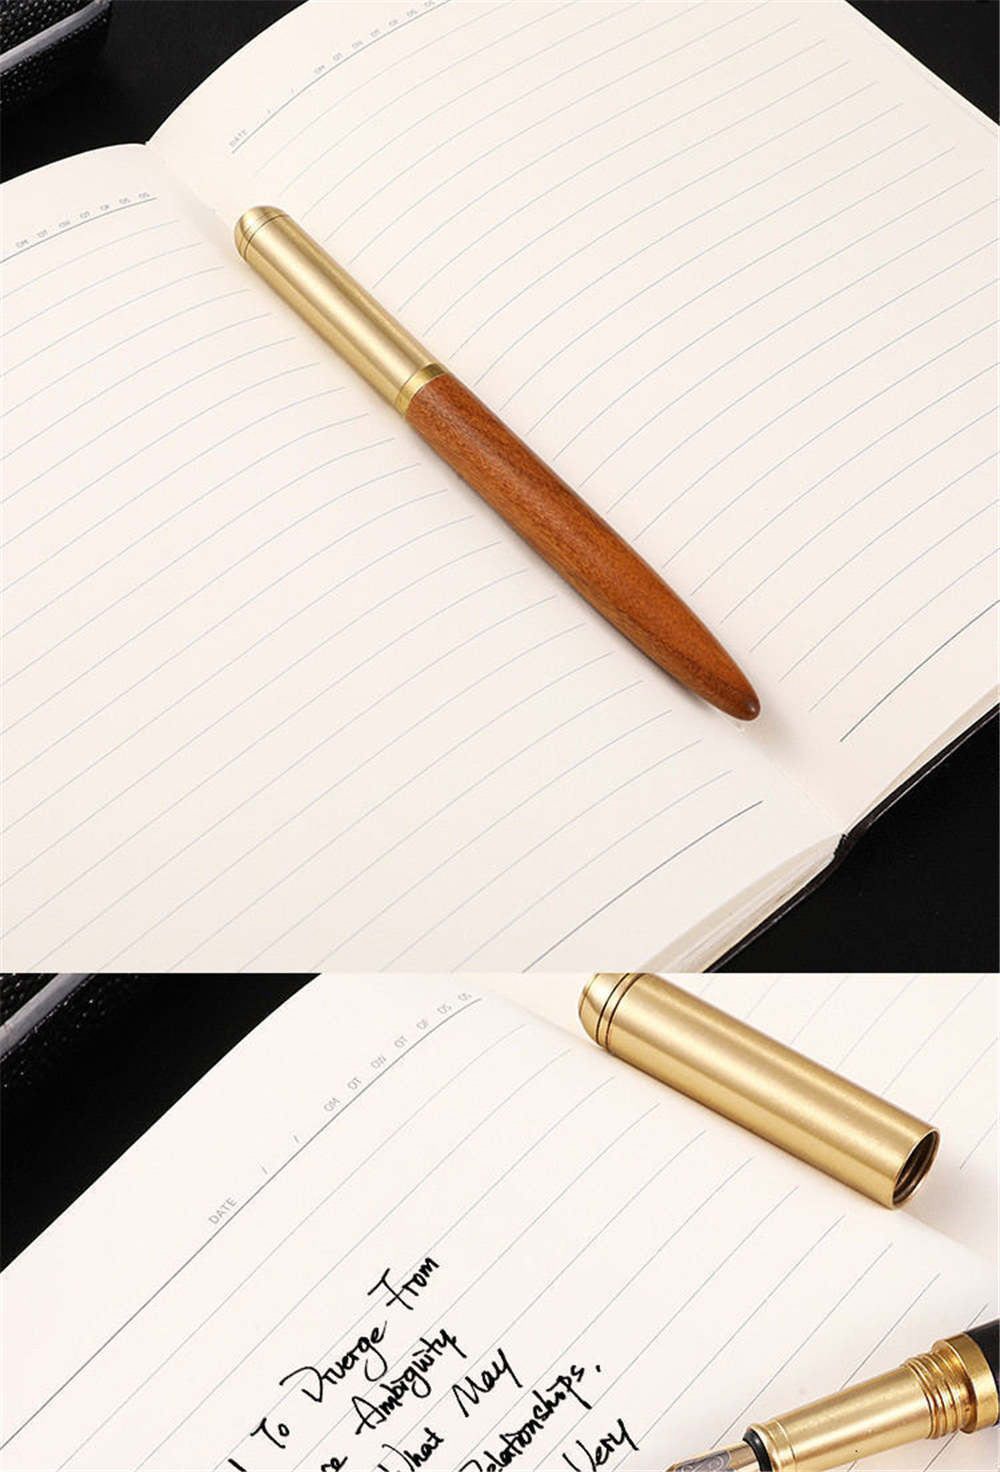 07mm-Nib-Wood-Fountain-Pen-Ink-Classic-Metal-Wood-Pen-Calligraphy-Writing-Business-Gifts-Stationery--1782368-8